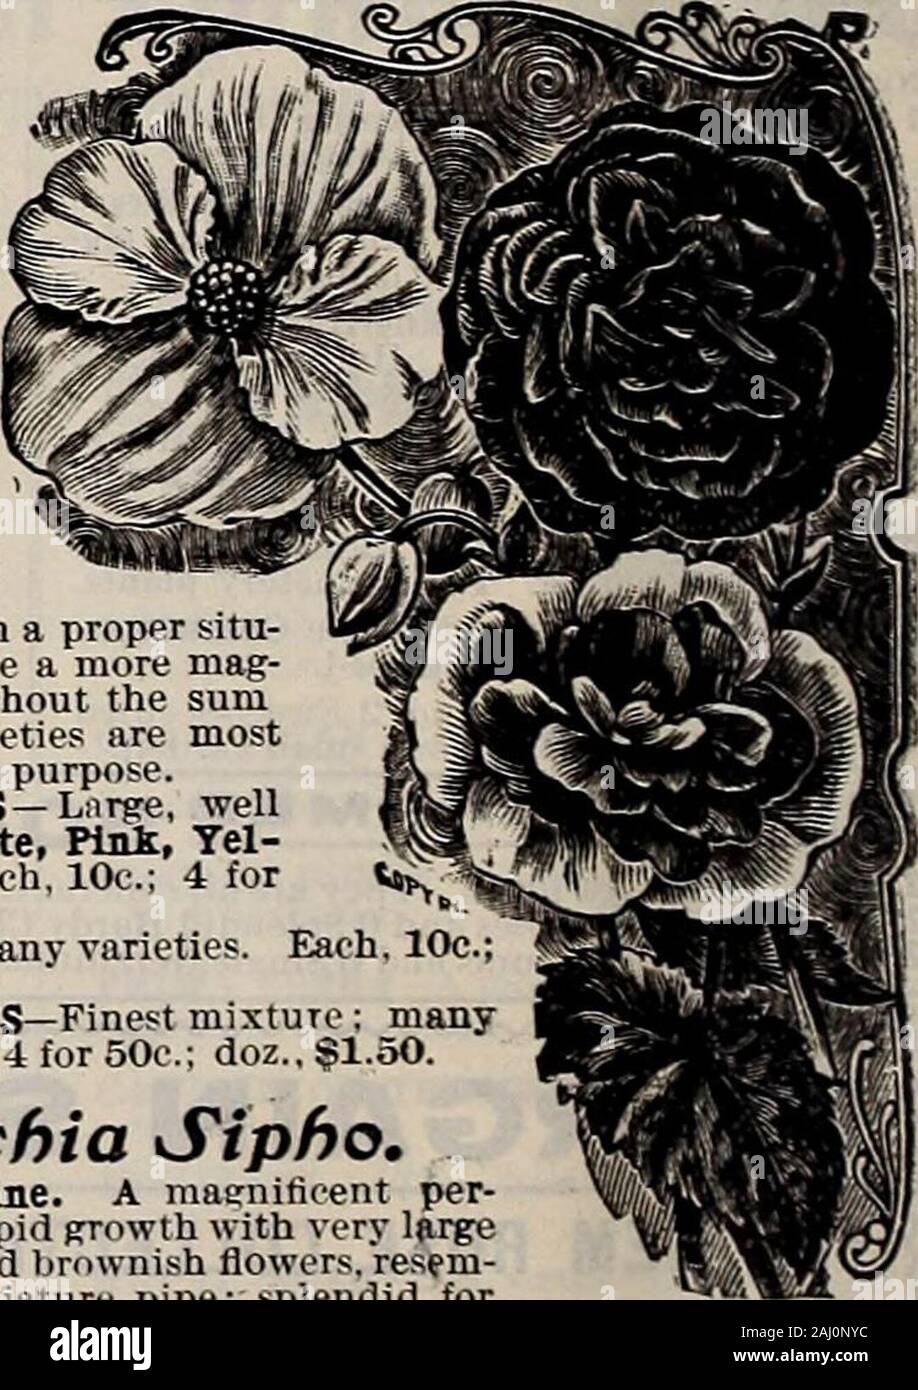 Livingston's seeds : 1902 'true blue' annual . VARIETIES-Lnrge, wellripened tubers. White, Pink, Yel-low and Crimson—Each, lOc; 4 for30c.: doz., 80c. SUfGLE, MIXEI&gt;—Many varietie4 for 25c.; doz., 75o. DOUBLE VARIETIES—Finest mixture: manyvarieties. Each, 16c.; 4 for 50c.: doz., §1.50. FLOWERIHG MAPLE. Each, IOC.; doz., $i.oo, exceptas noted. SAVlTZn—A new Japan maple^leaf variety: plant dwarf and com-pact: foliage large, clearly defined-with deep border on leaf; distinctand valuable plant. Each, 15c. SODV. de BOITH-Similar to theabove, but a stronger grower andnarrower white edge on leaves. Stock Photo